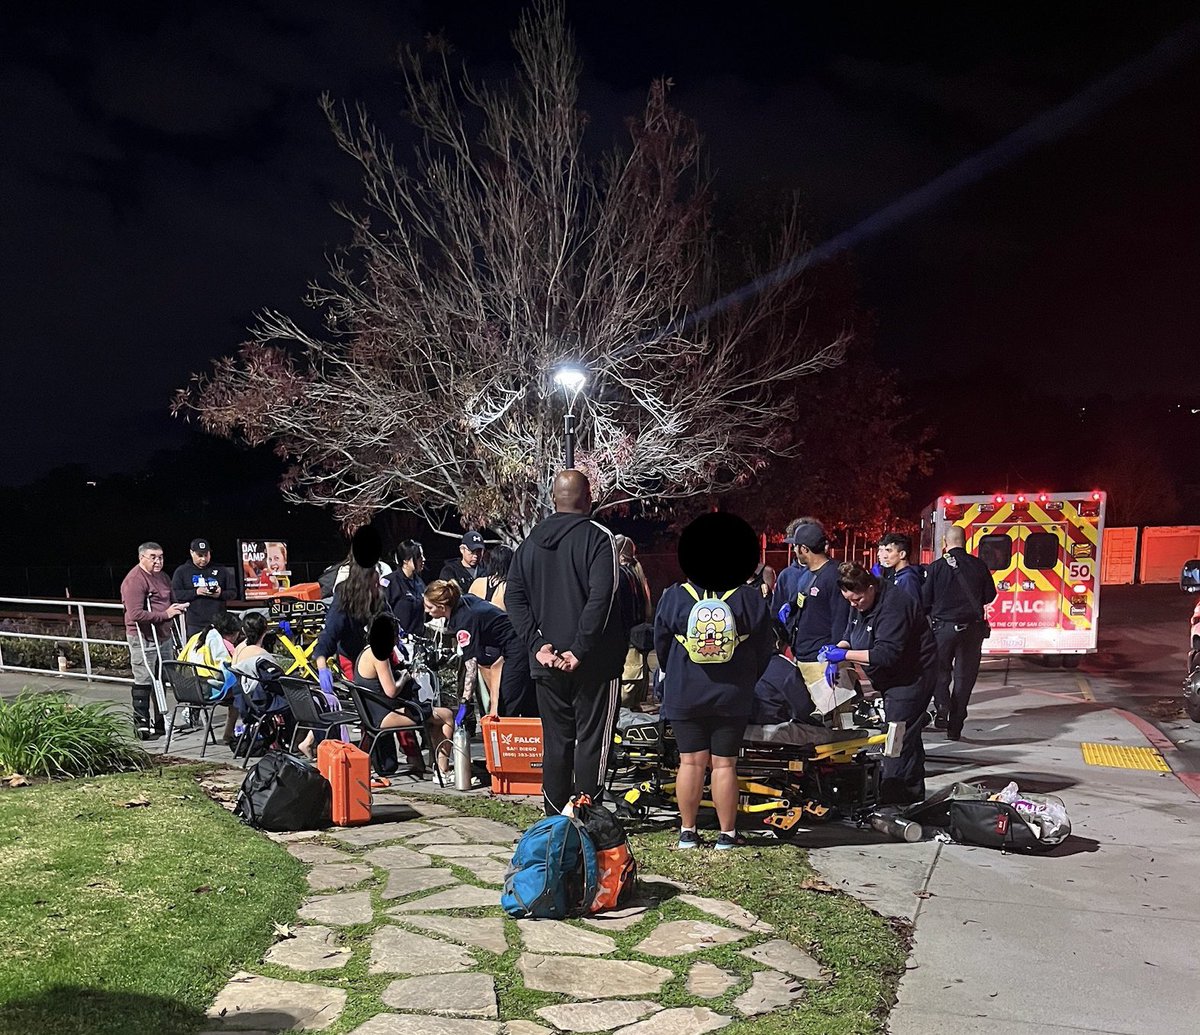 12 kids and one adult being evaluated after patients in the pool of the YMCA on Friars Rd felt ill. All patients categorized as  minor ; as far as injury level. Two patients transported to hospital